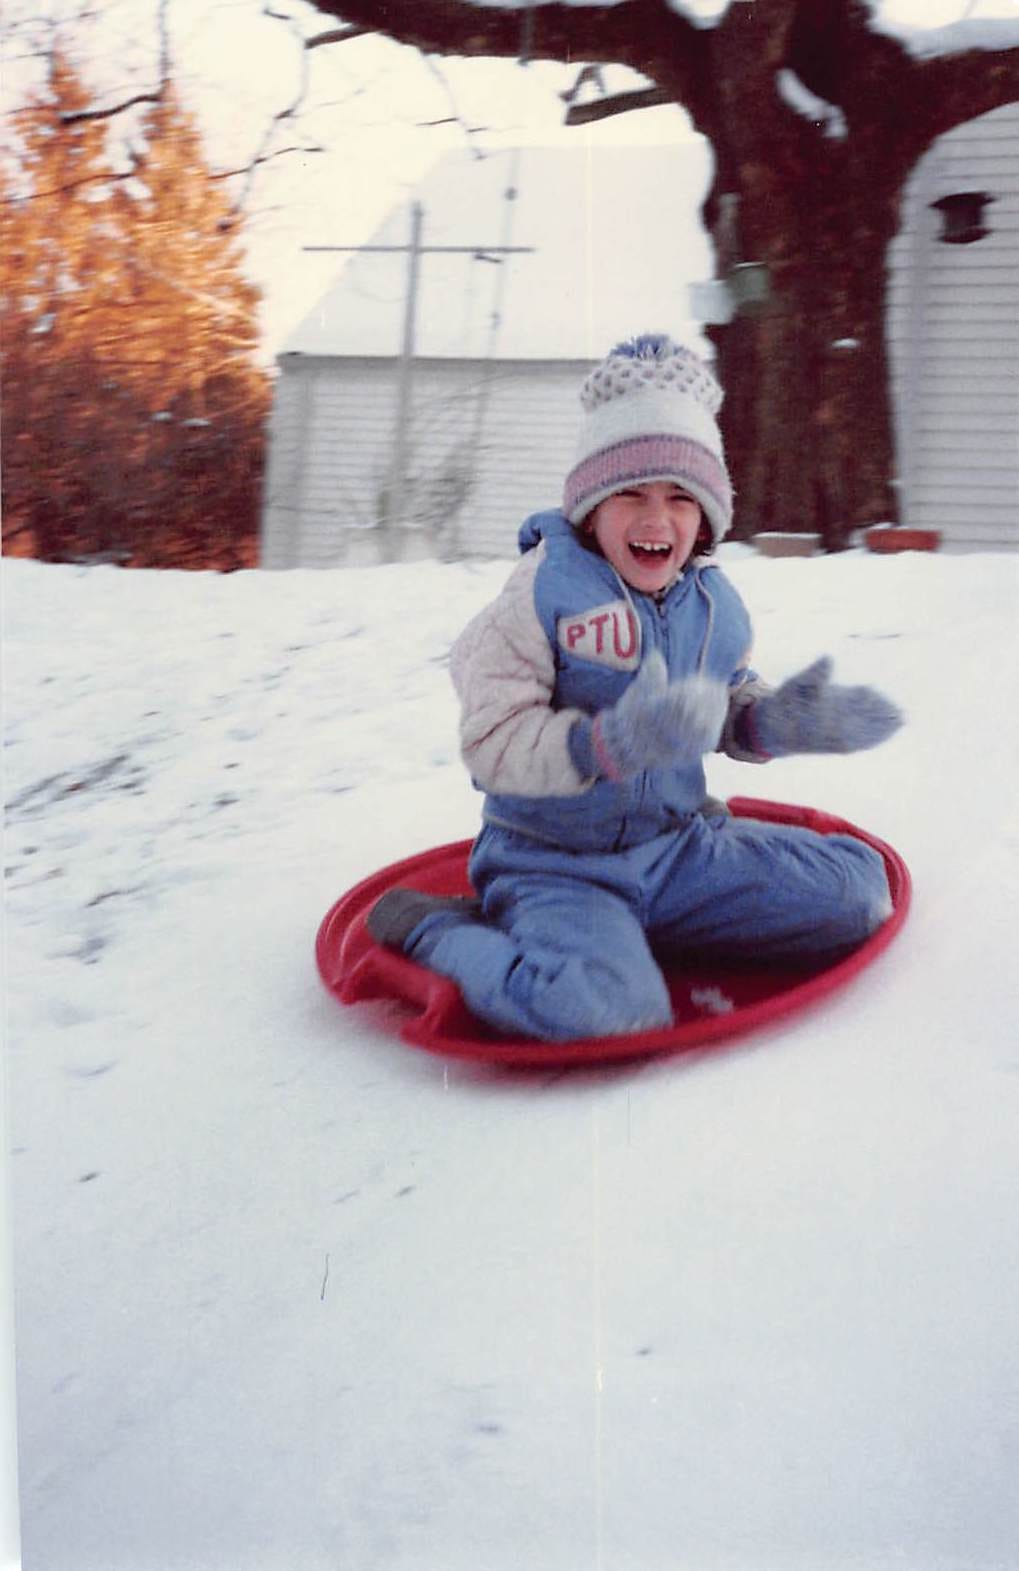 Young child in a snowsuit, sledding down a snowy hill on a red saucer sled, with an expression of utter delight on her face.